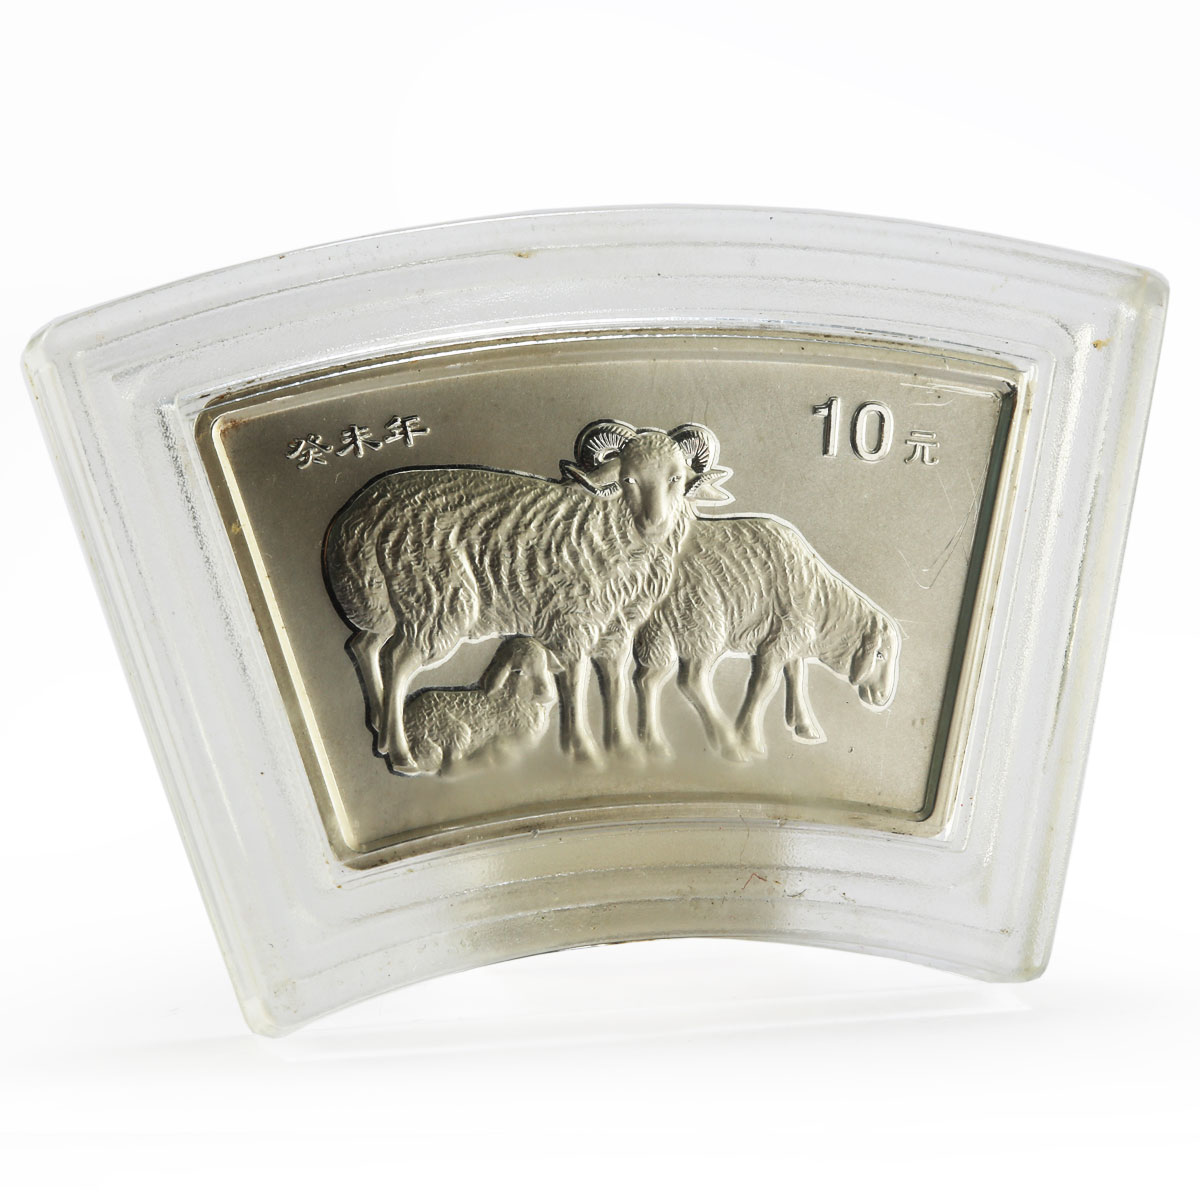 China 10 yuan Year of the Sheep proof silver coin 2003